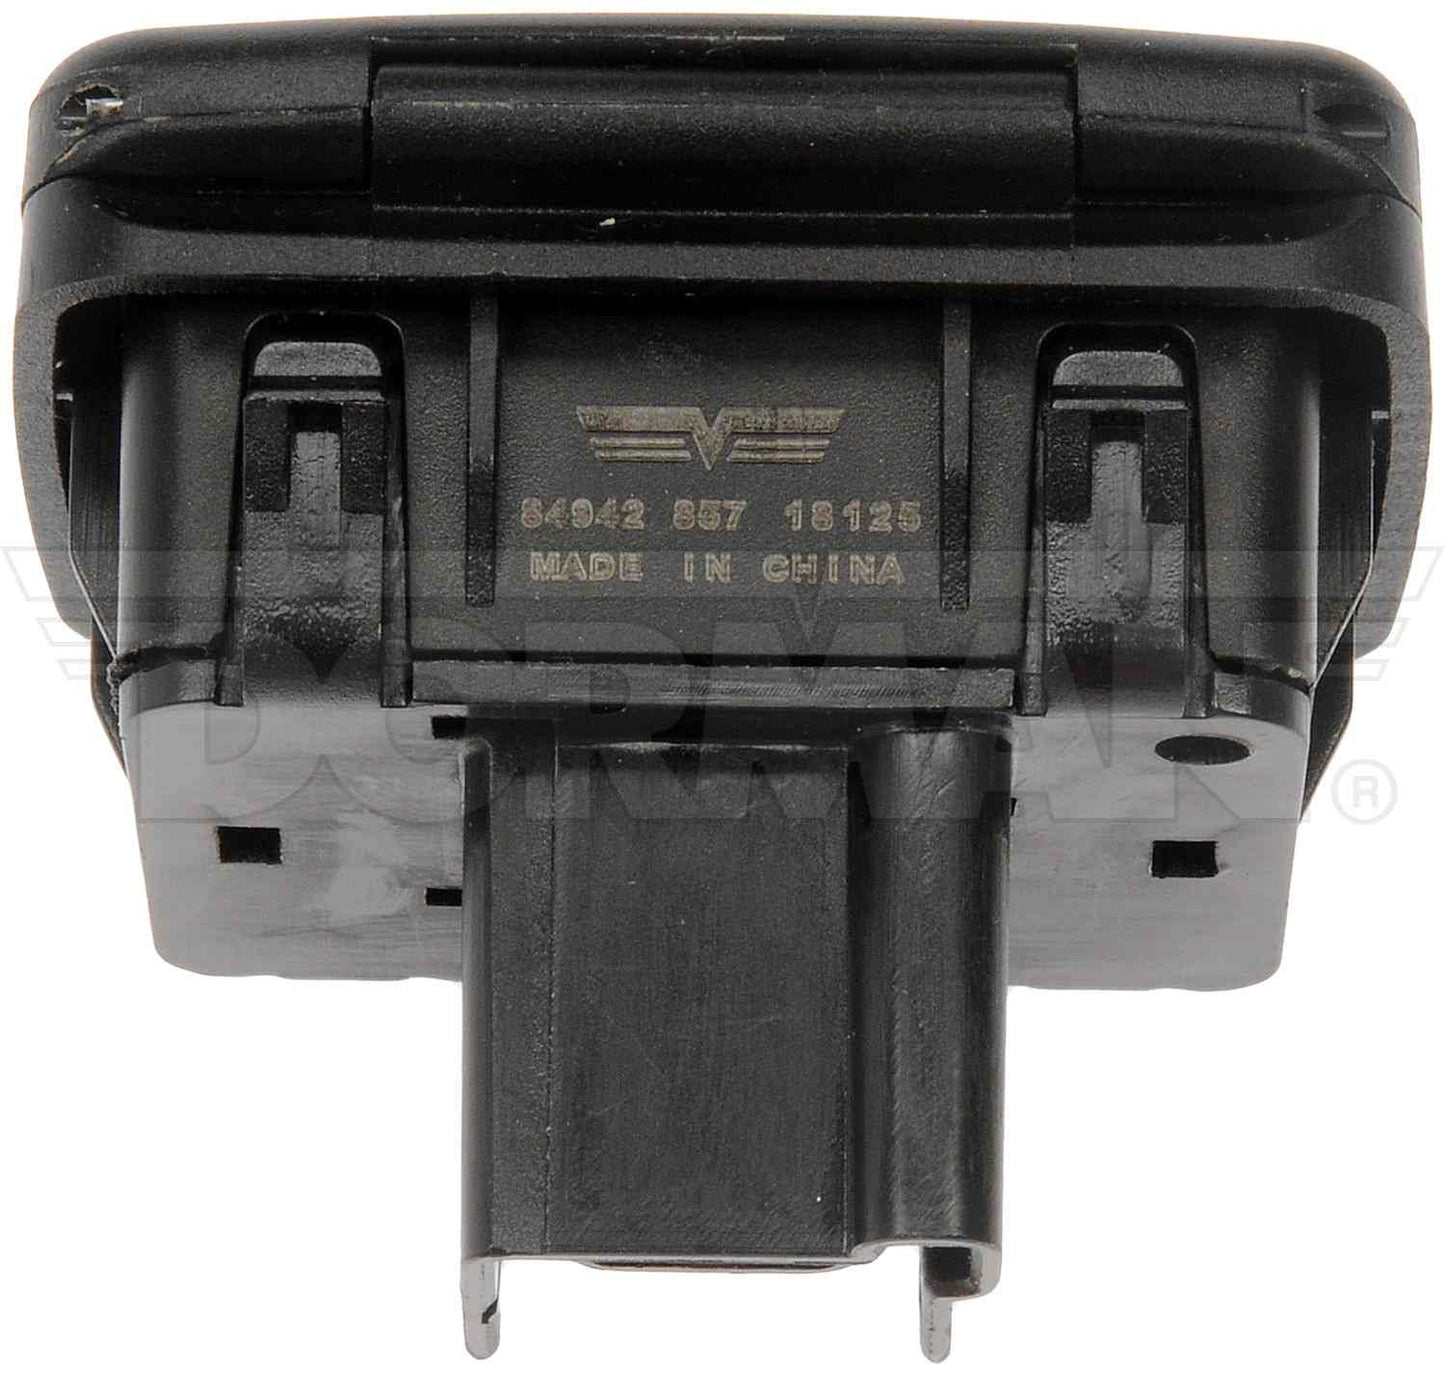 Front View of 110 Volt Accessory Power Outlet MOTORMITE 84942